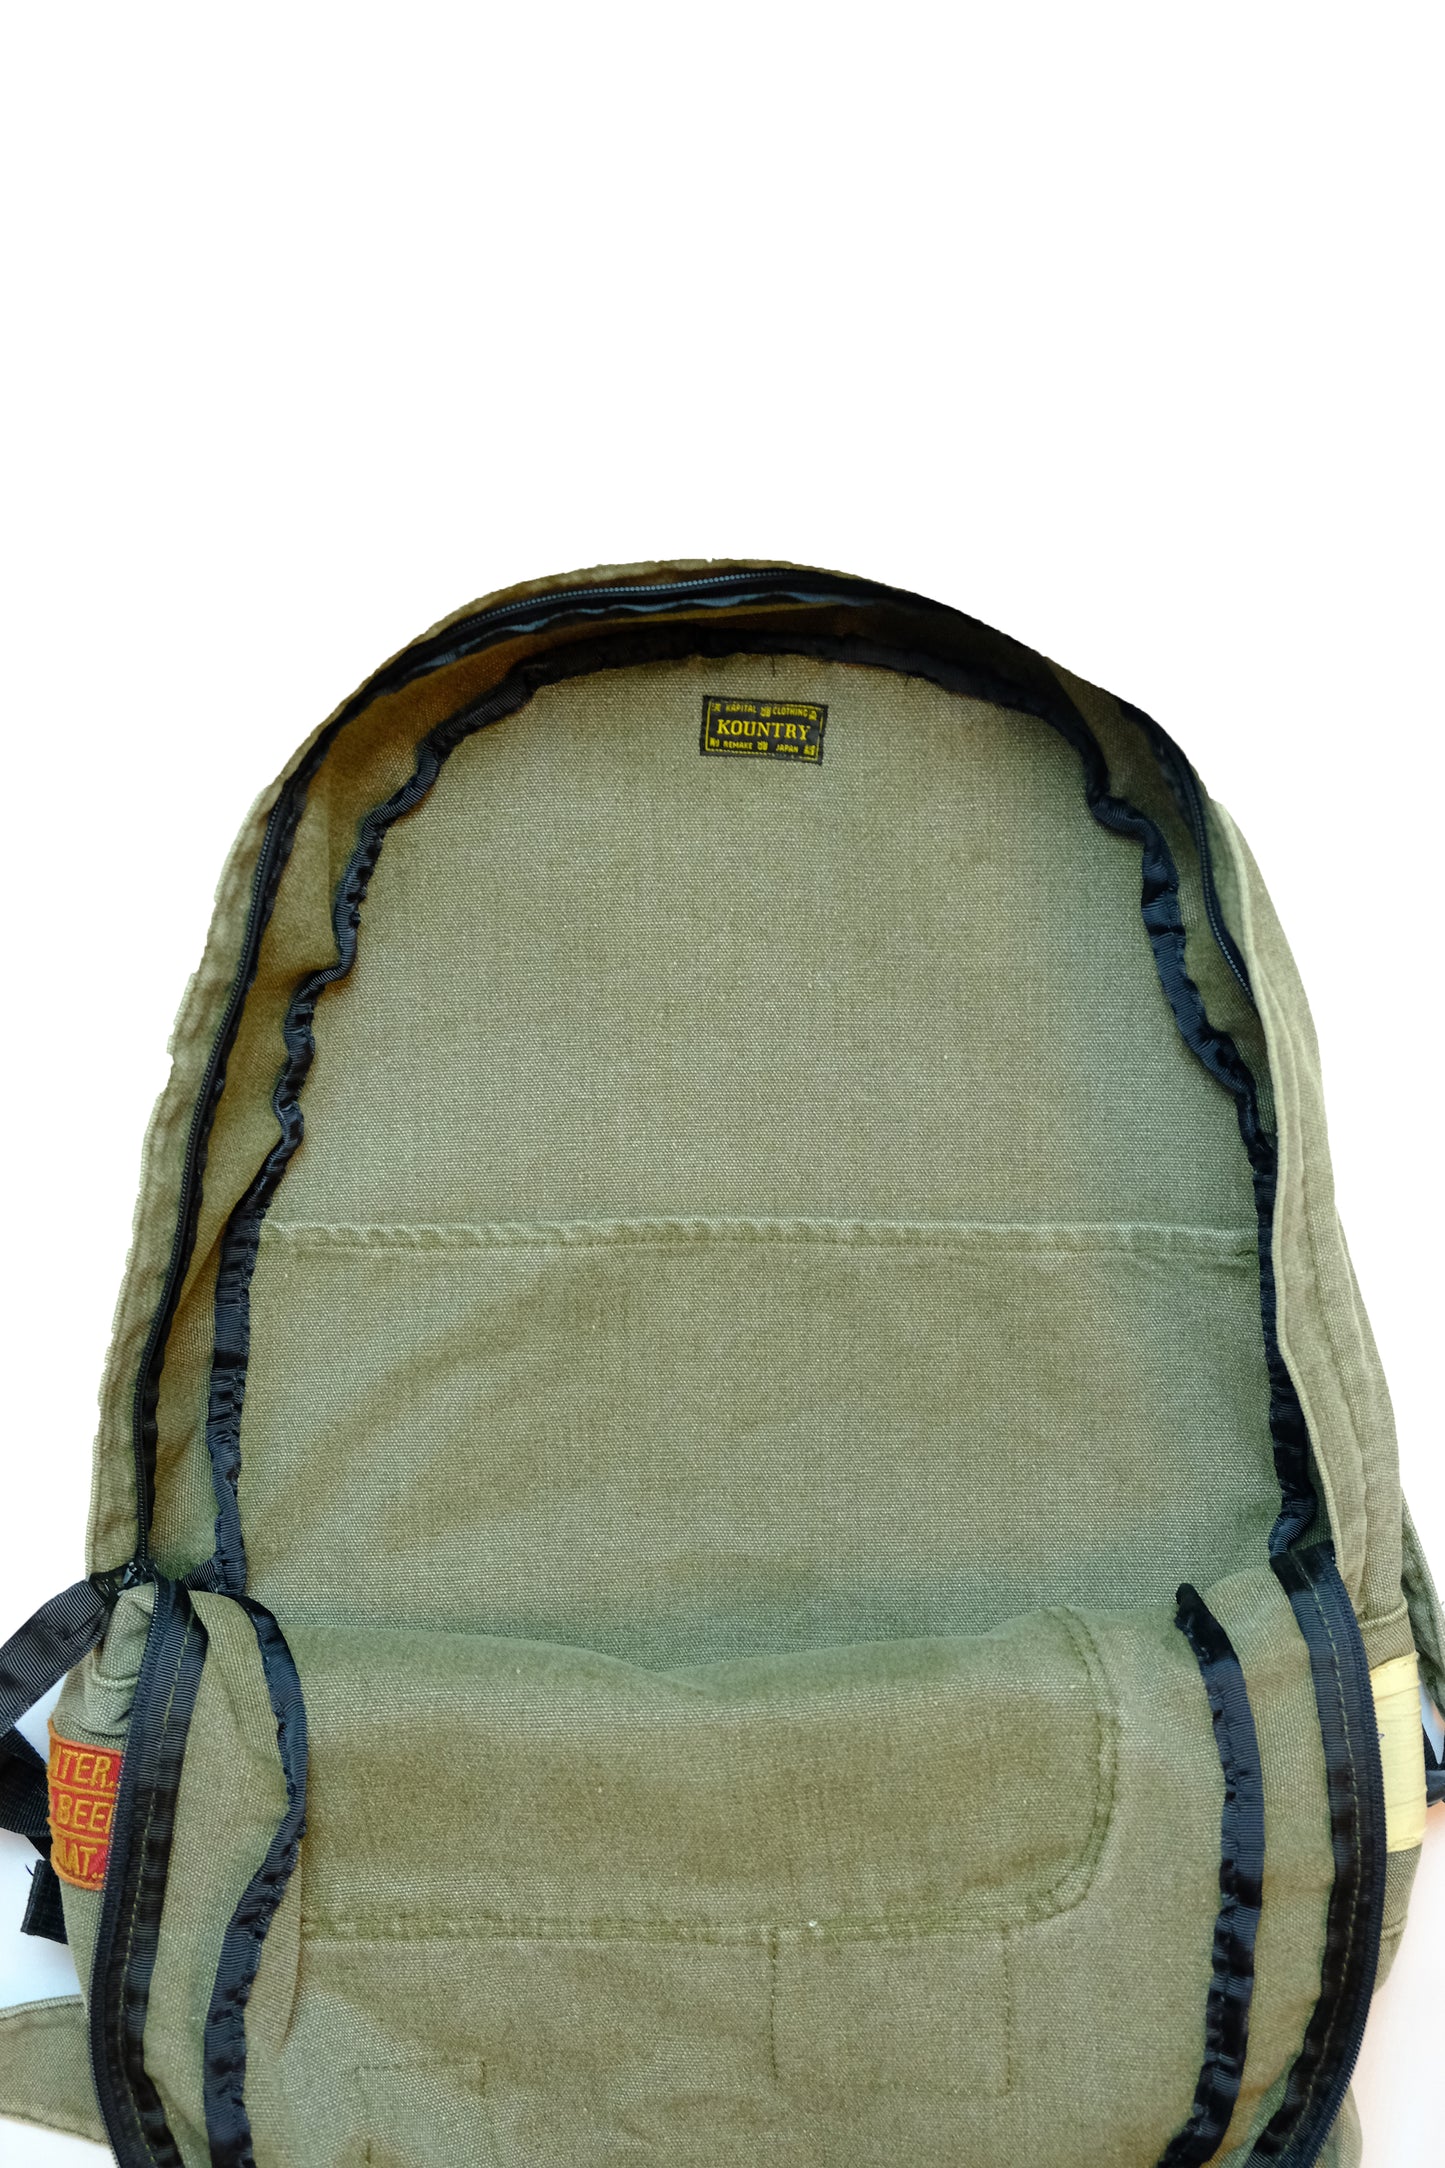 Kapital - Kountry No. 4 3in1 Patchwork Canvas Military Backpack – Archaic  Archive